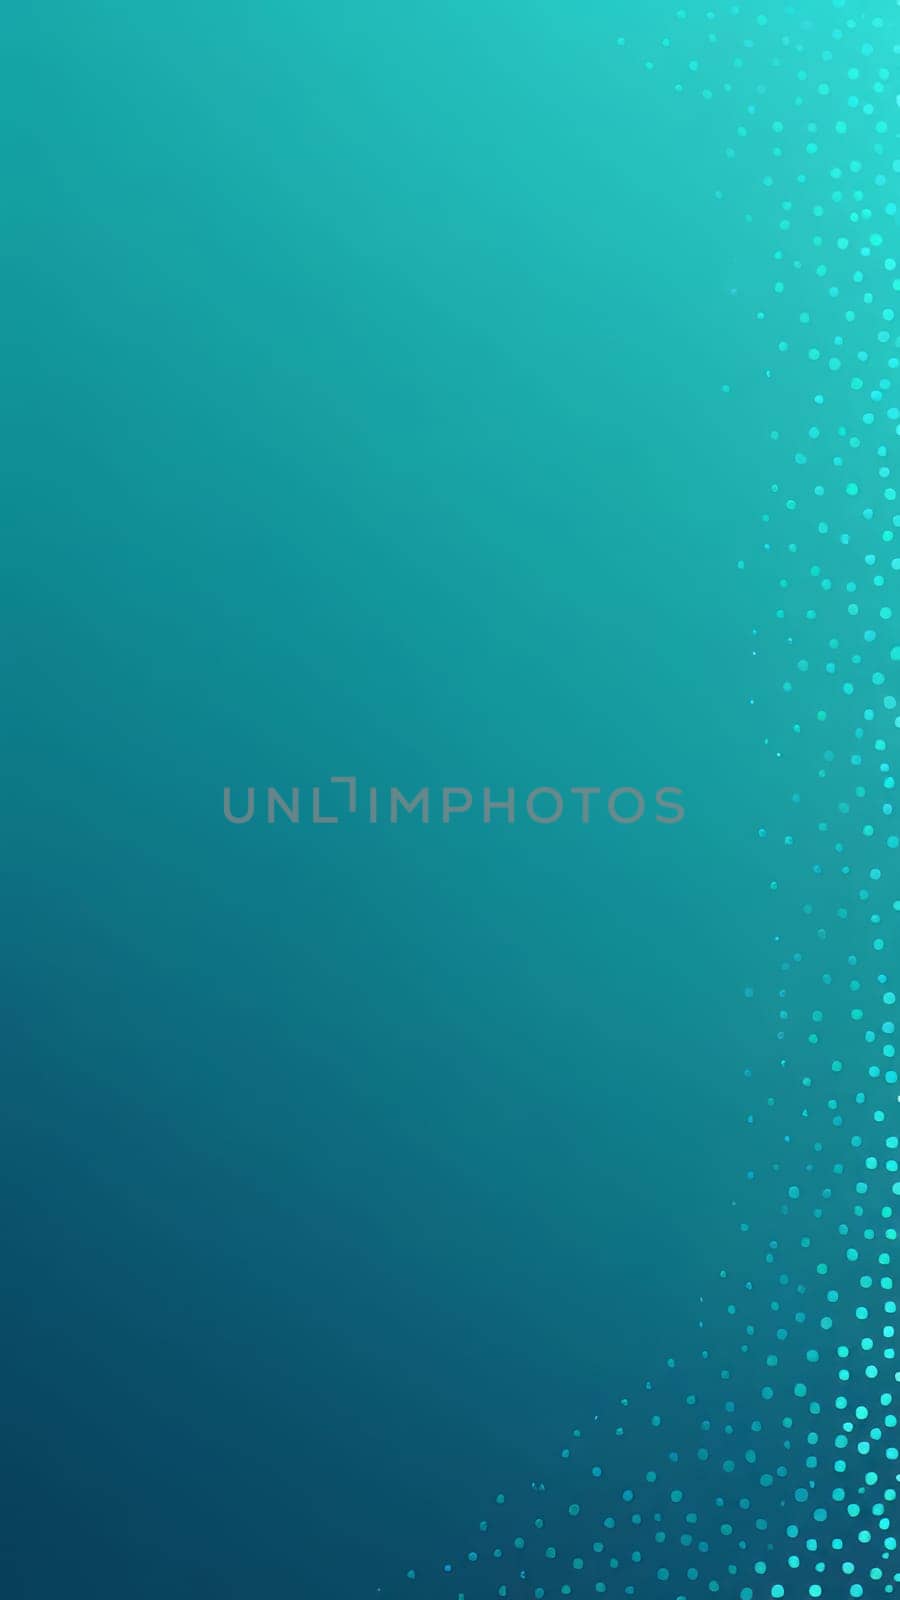 Screen background from Dotted shapes and teal by nkotlyar